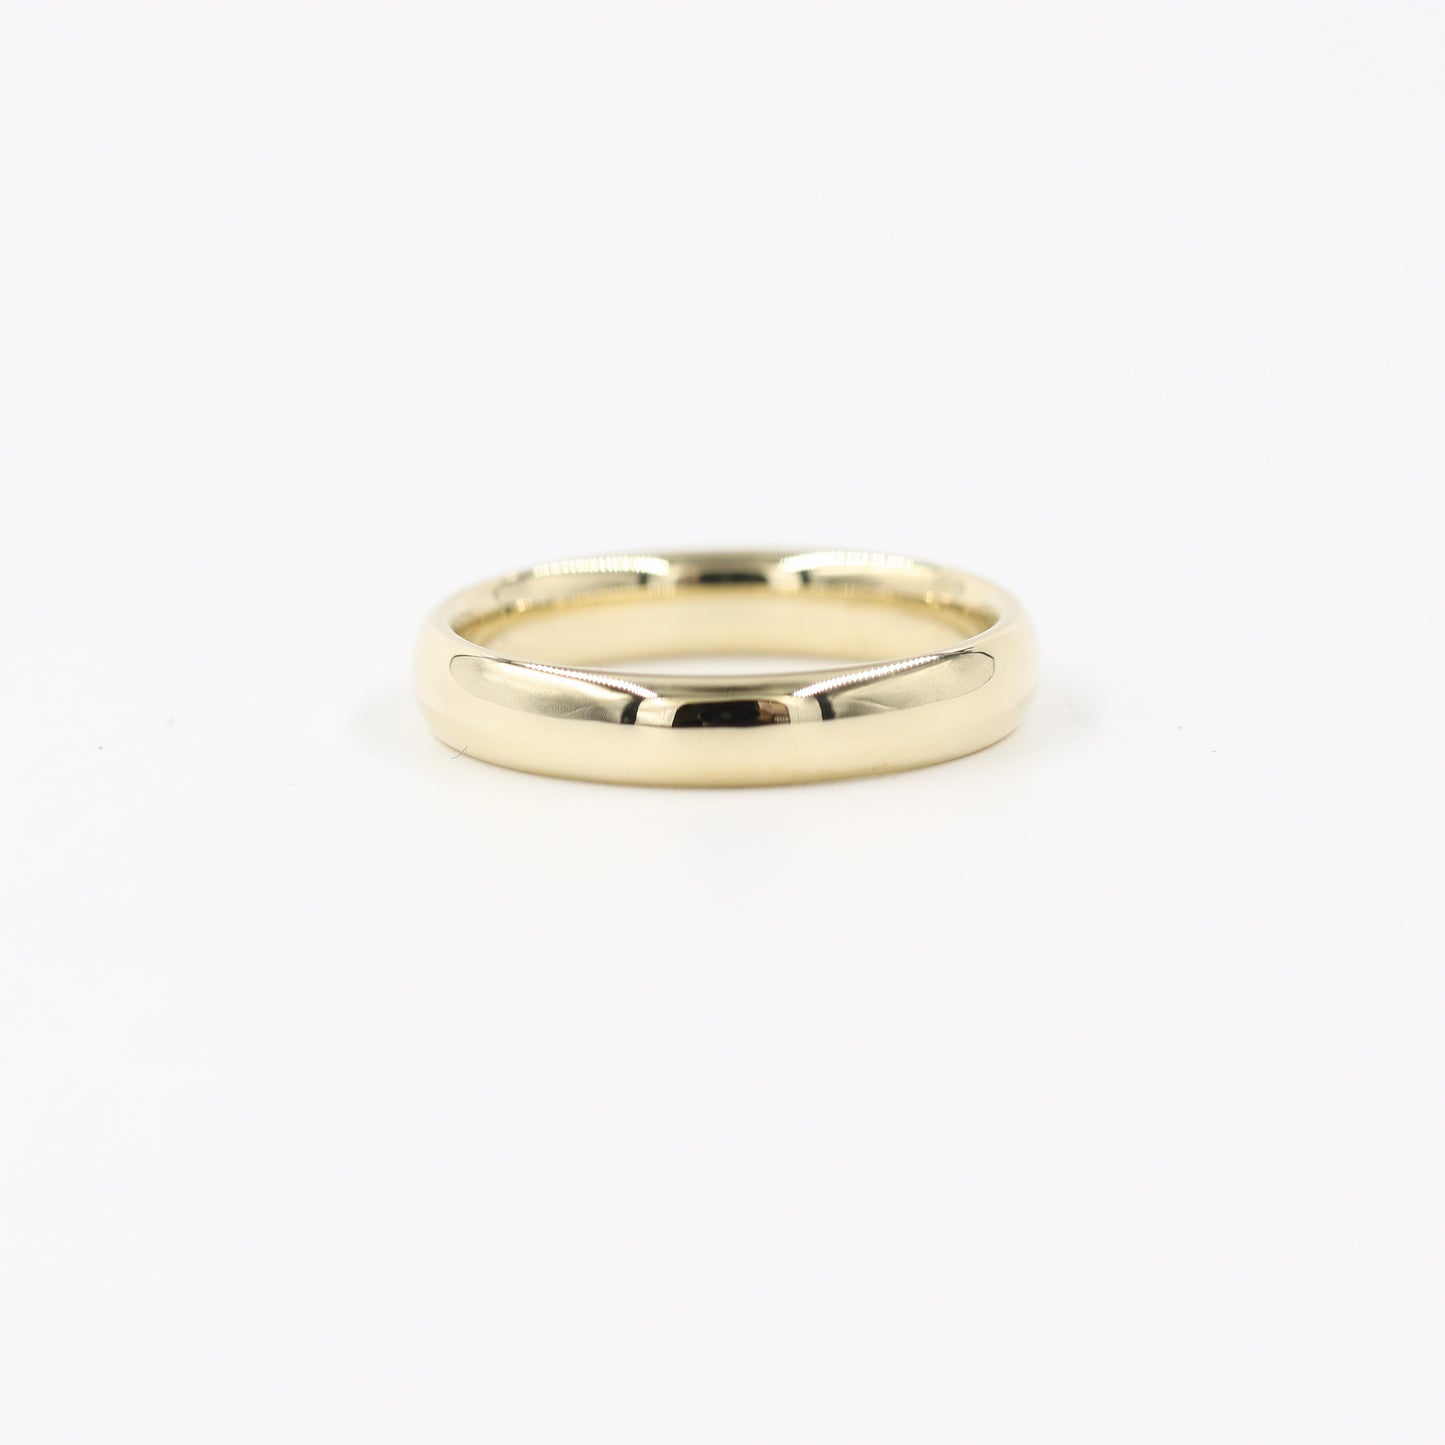 14k Gold Band 4.5mm/ Men's and Women's Wedding Ring/ Gold Wedding Band/ Promise Ring/ Delicate Ring